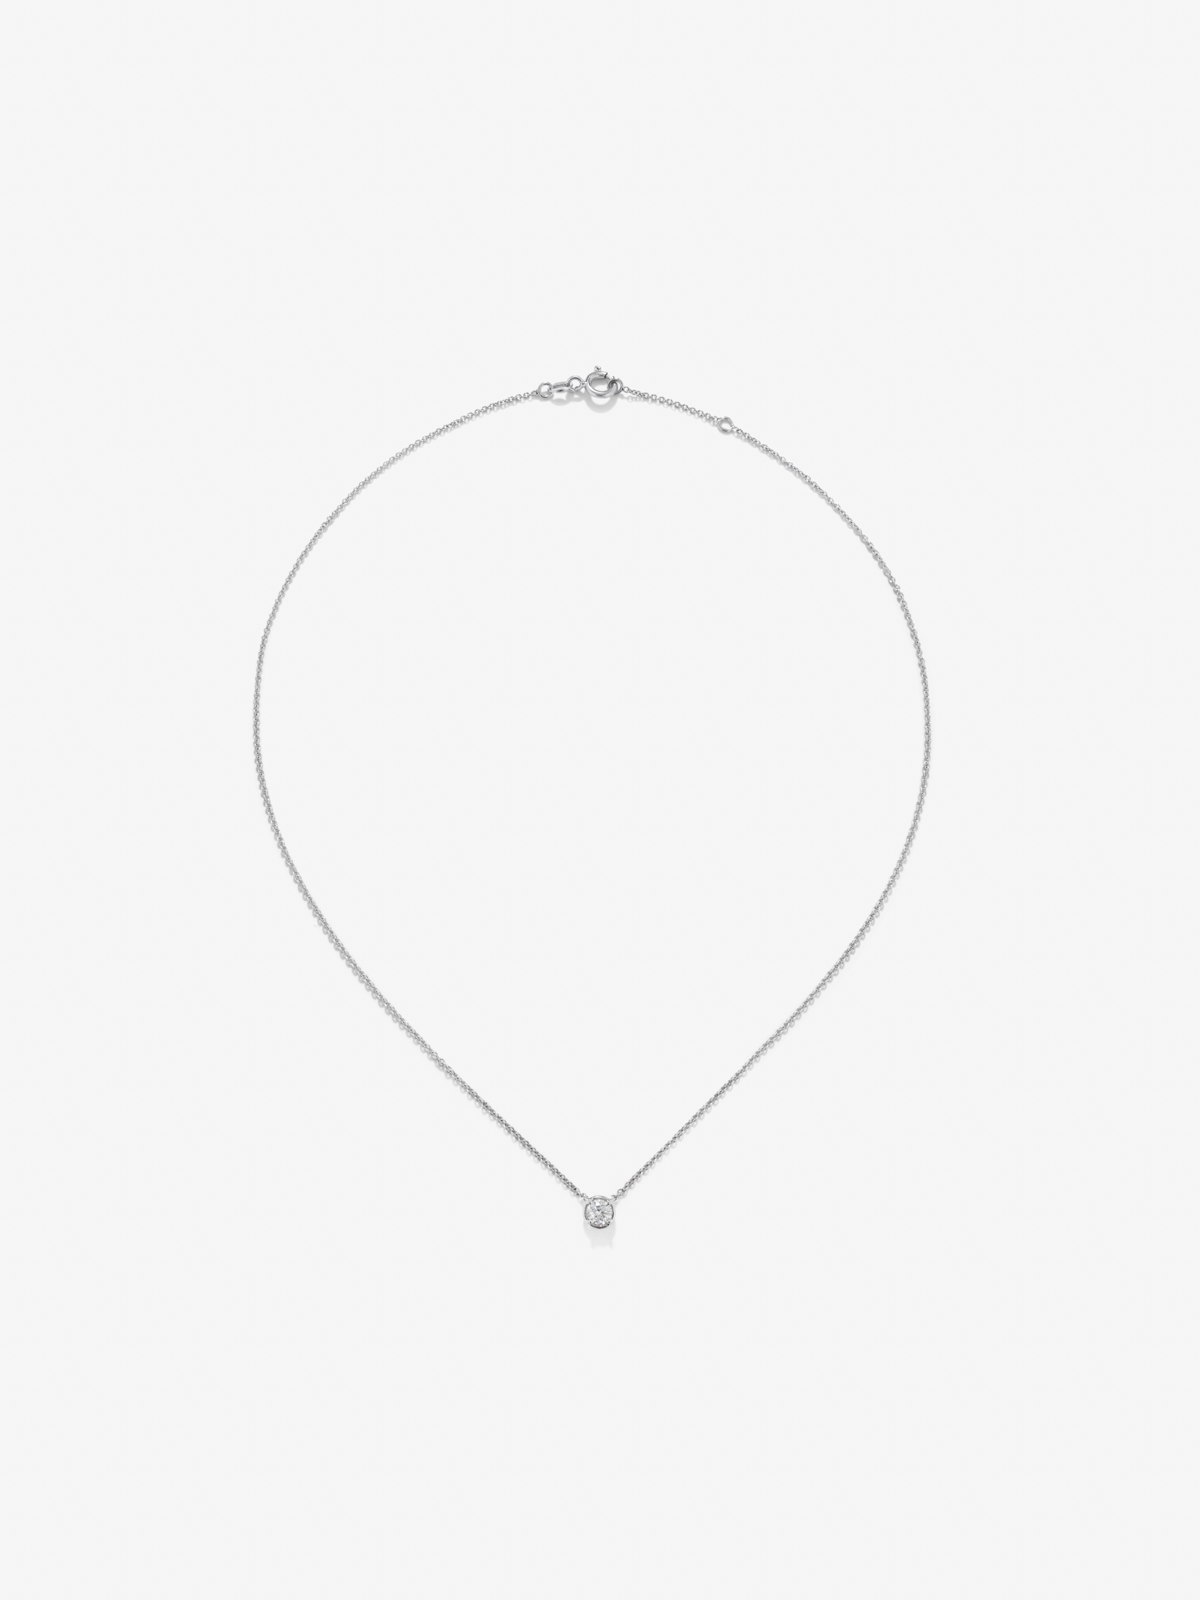 18K white gold chain pendant with solitary diamond